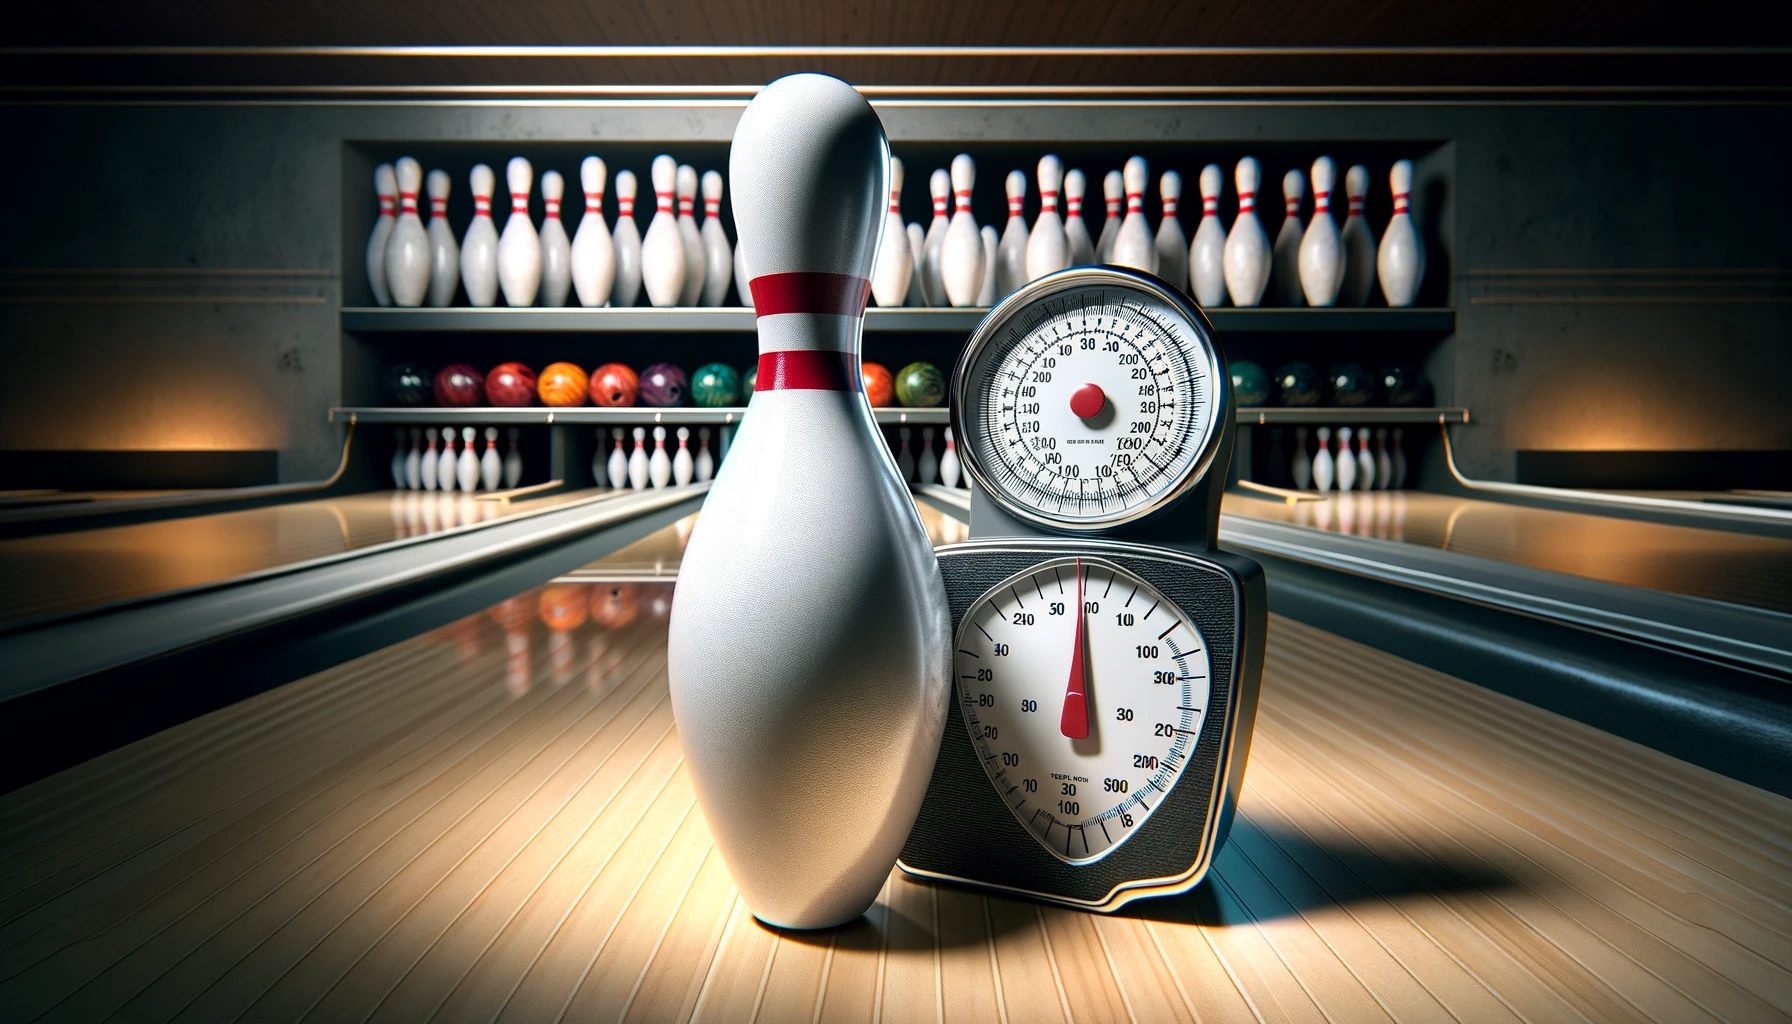 How much does a bowling pin weigh?